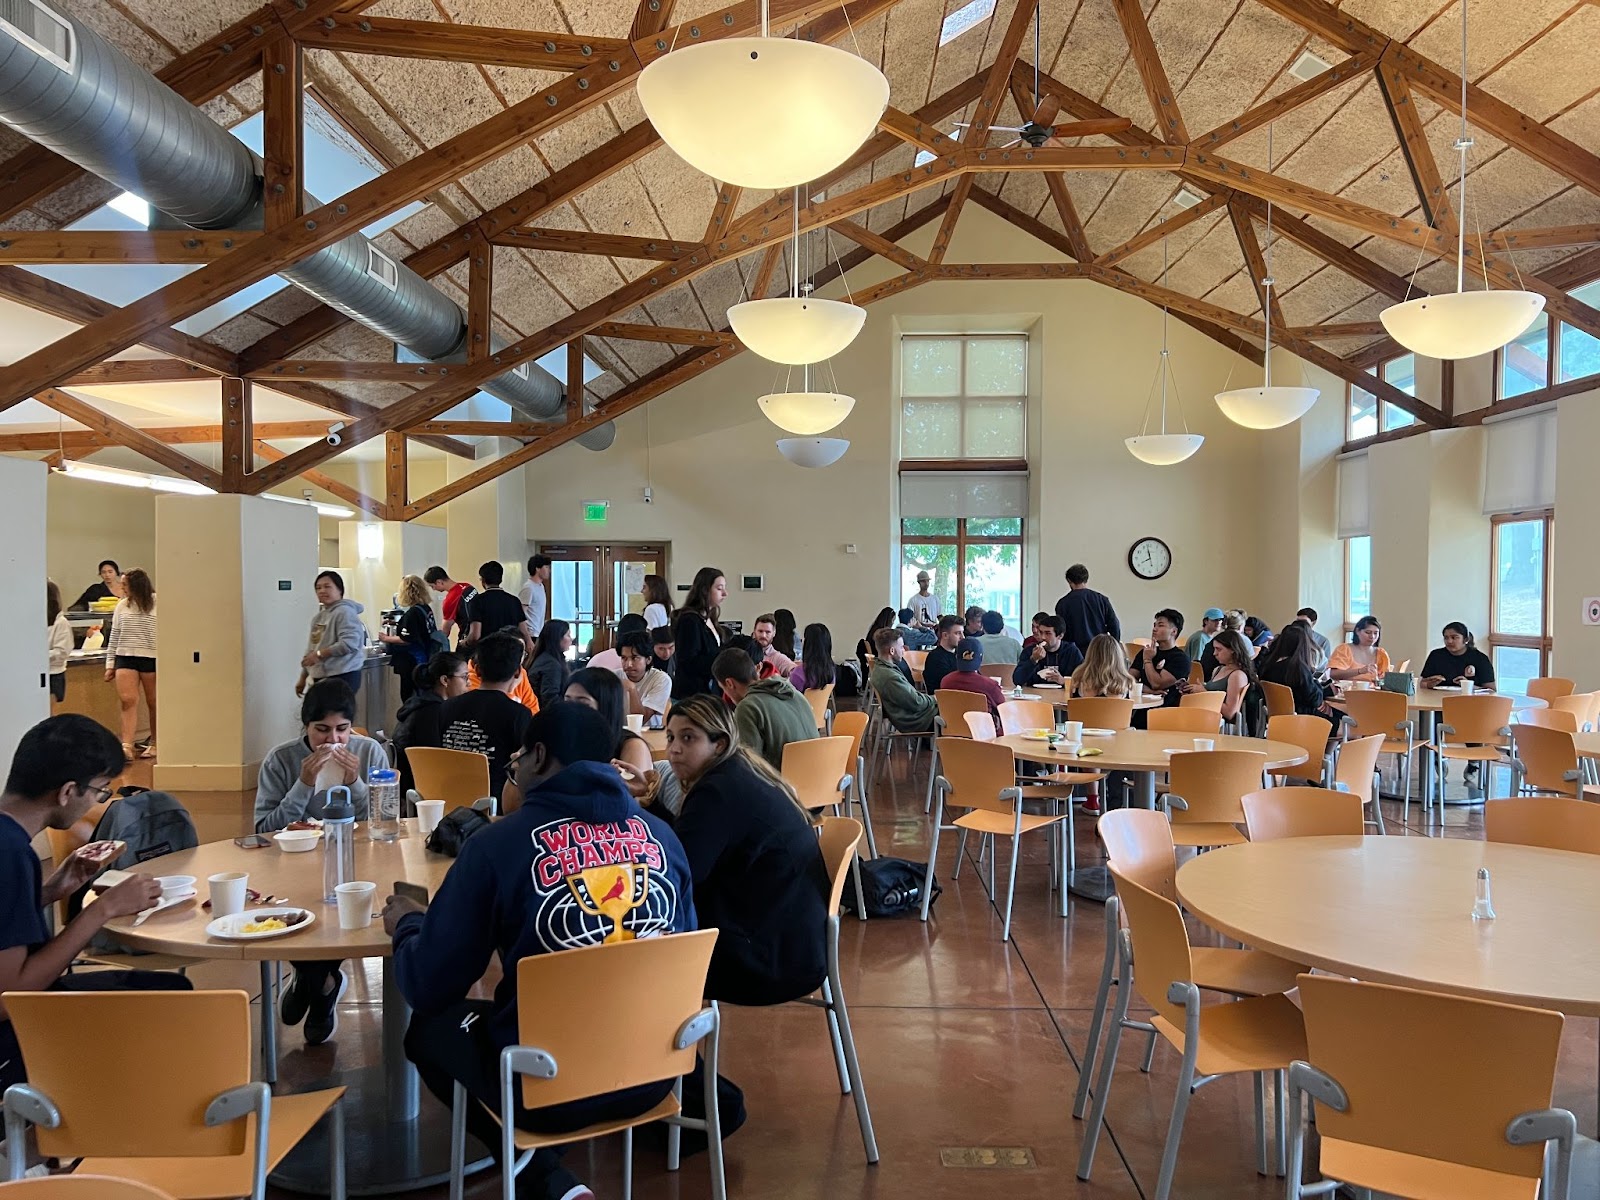 Residents at the retreat are having breakfast in the dining area.